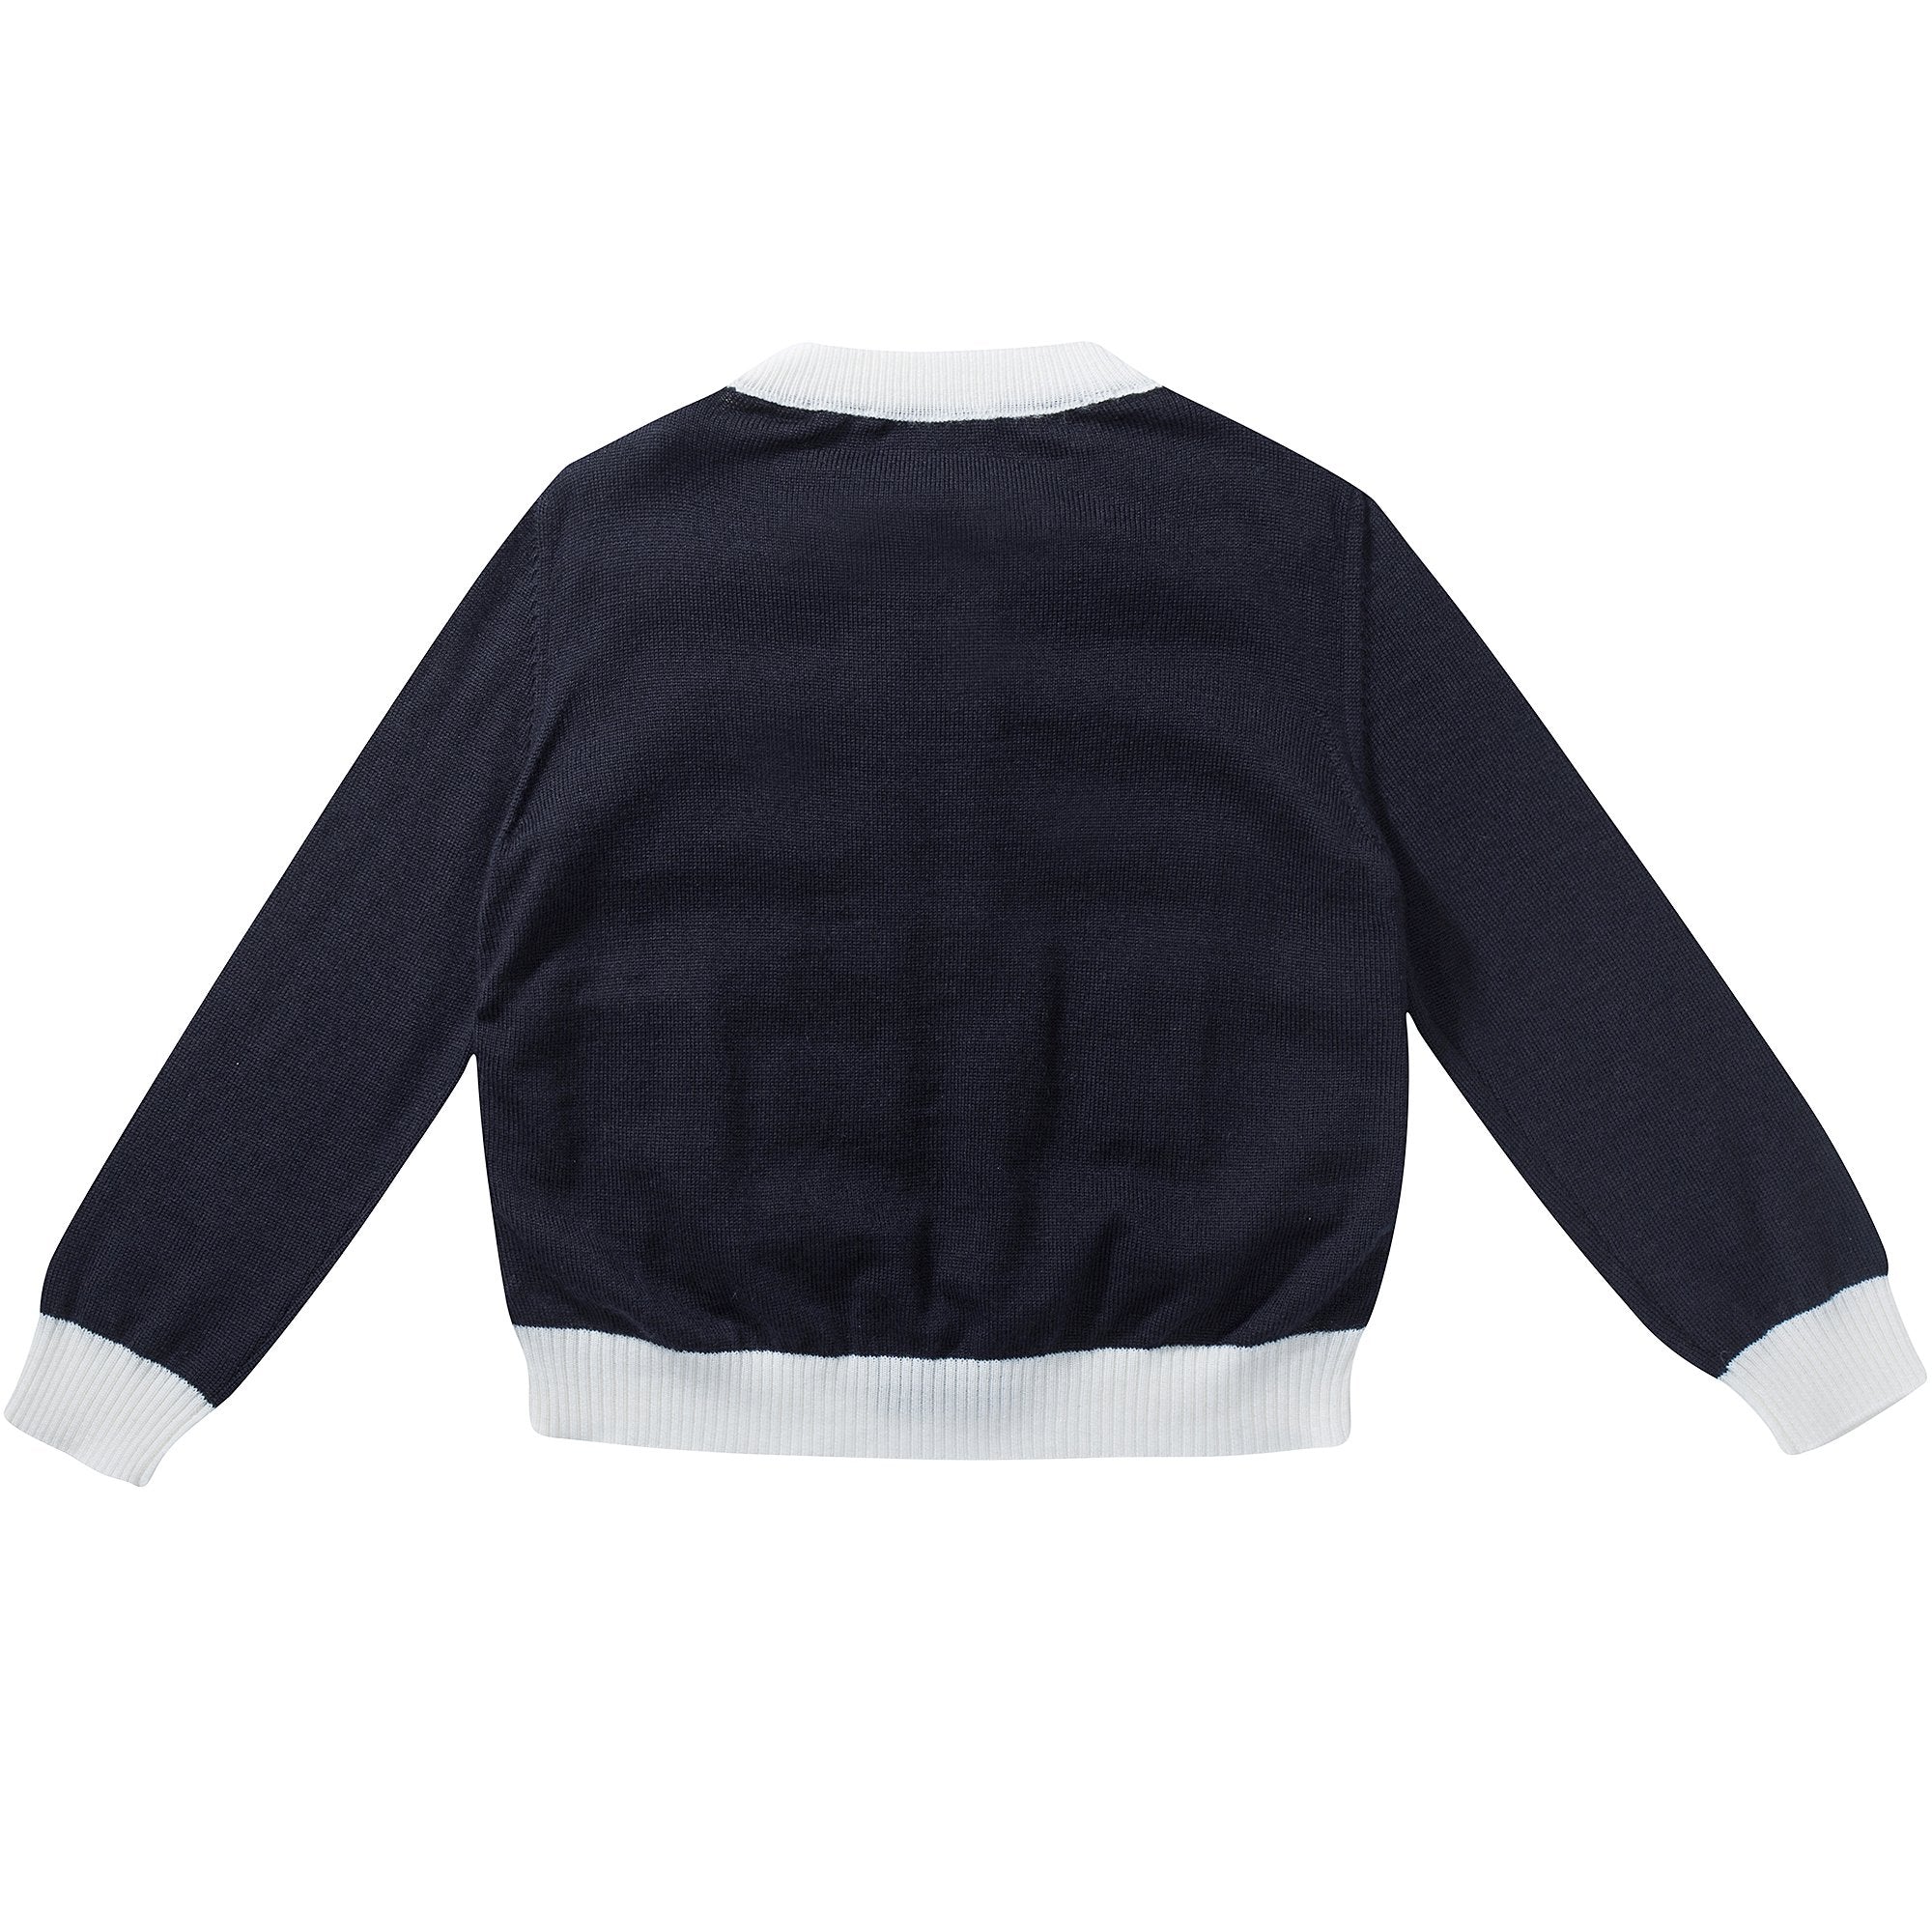 Baby  Girls  Navy  Blue  "Maglia Tricot"  Cardigan